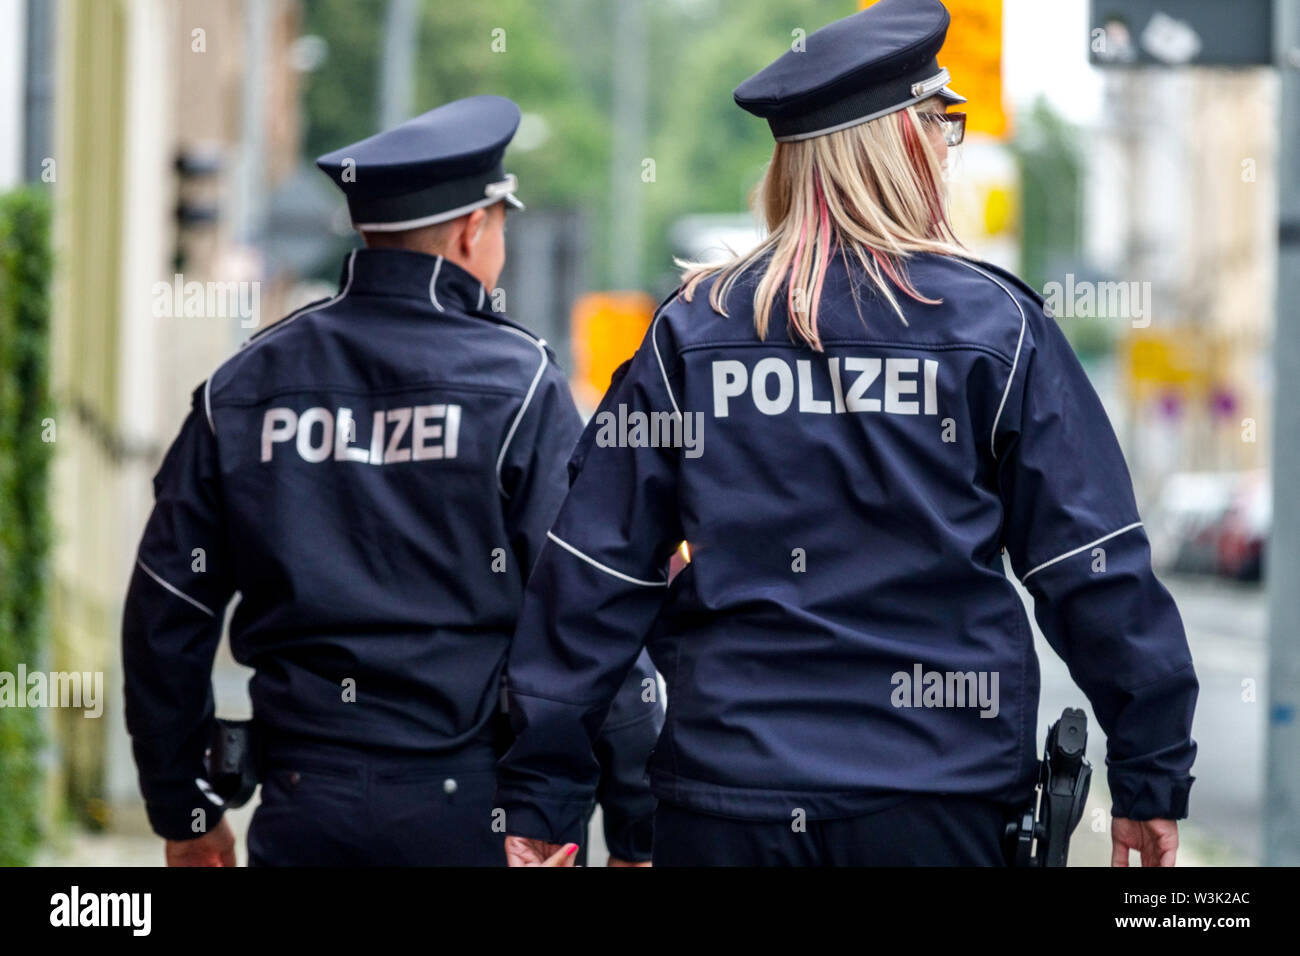 Germany Police Officer woman Two police patrol Germany policeman police ...